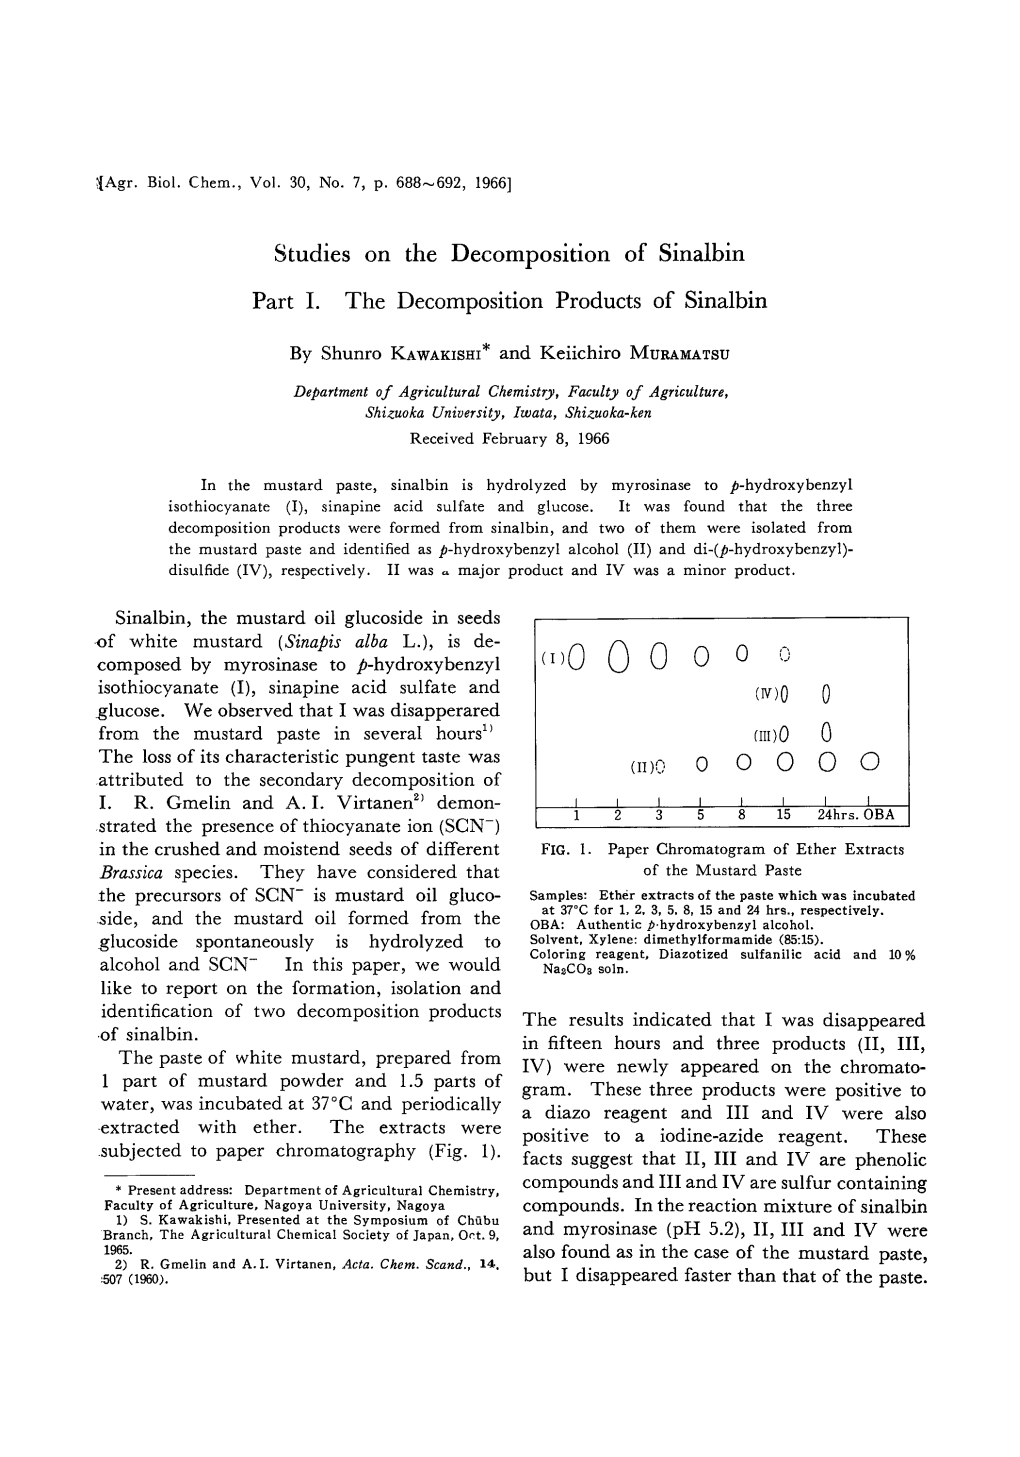 Studies on the Decomposition of Sinalbin Part I. the Decomposition